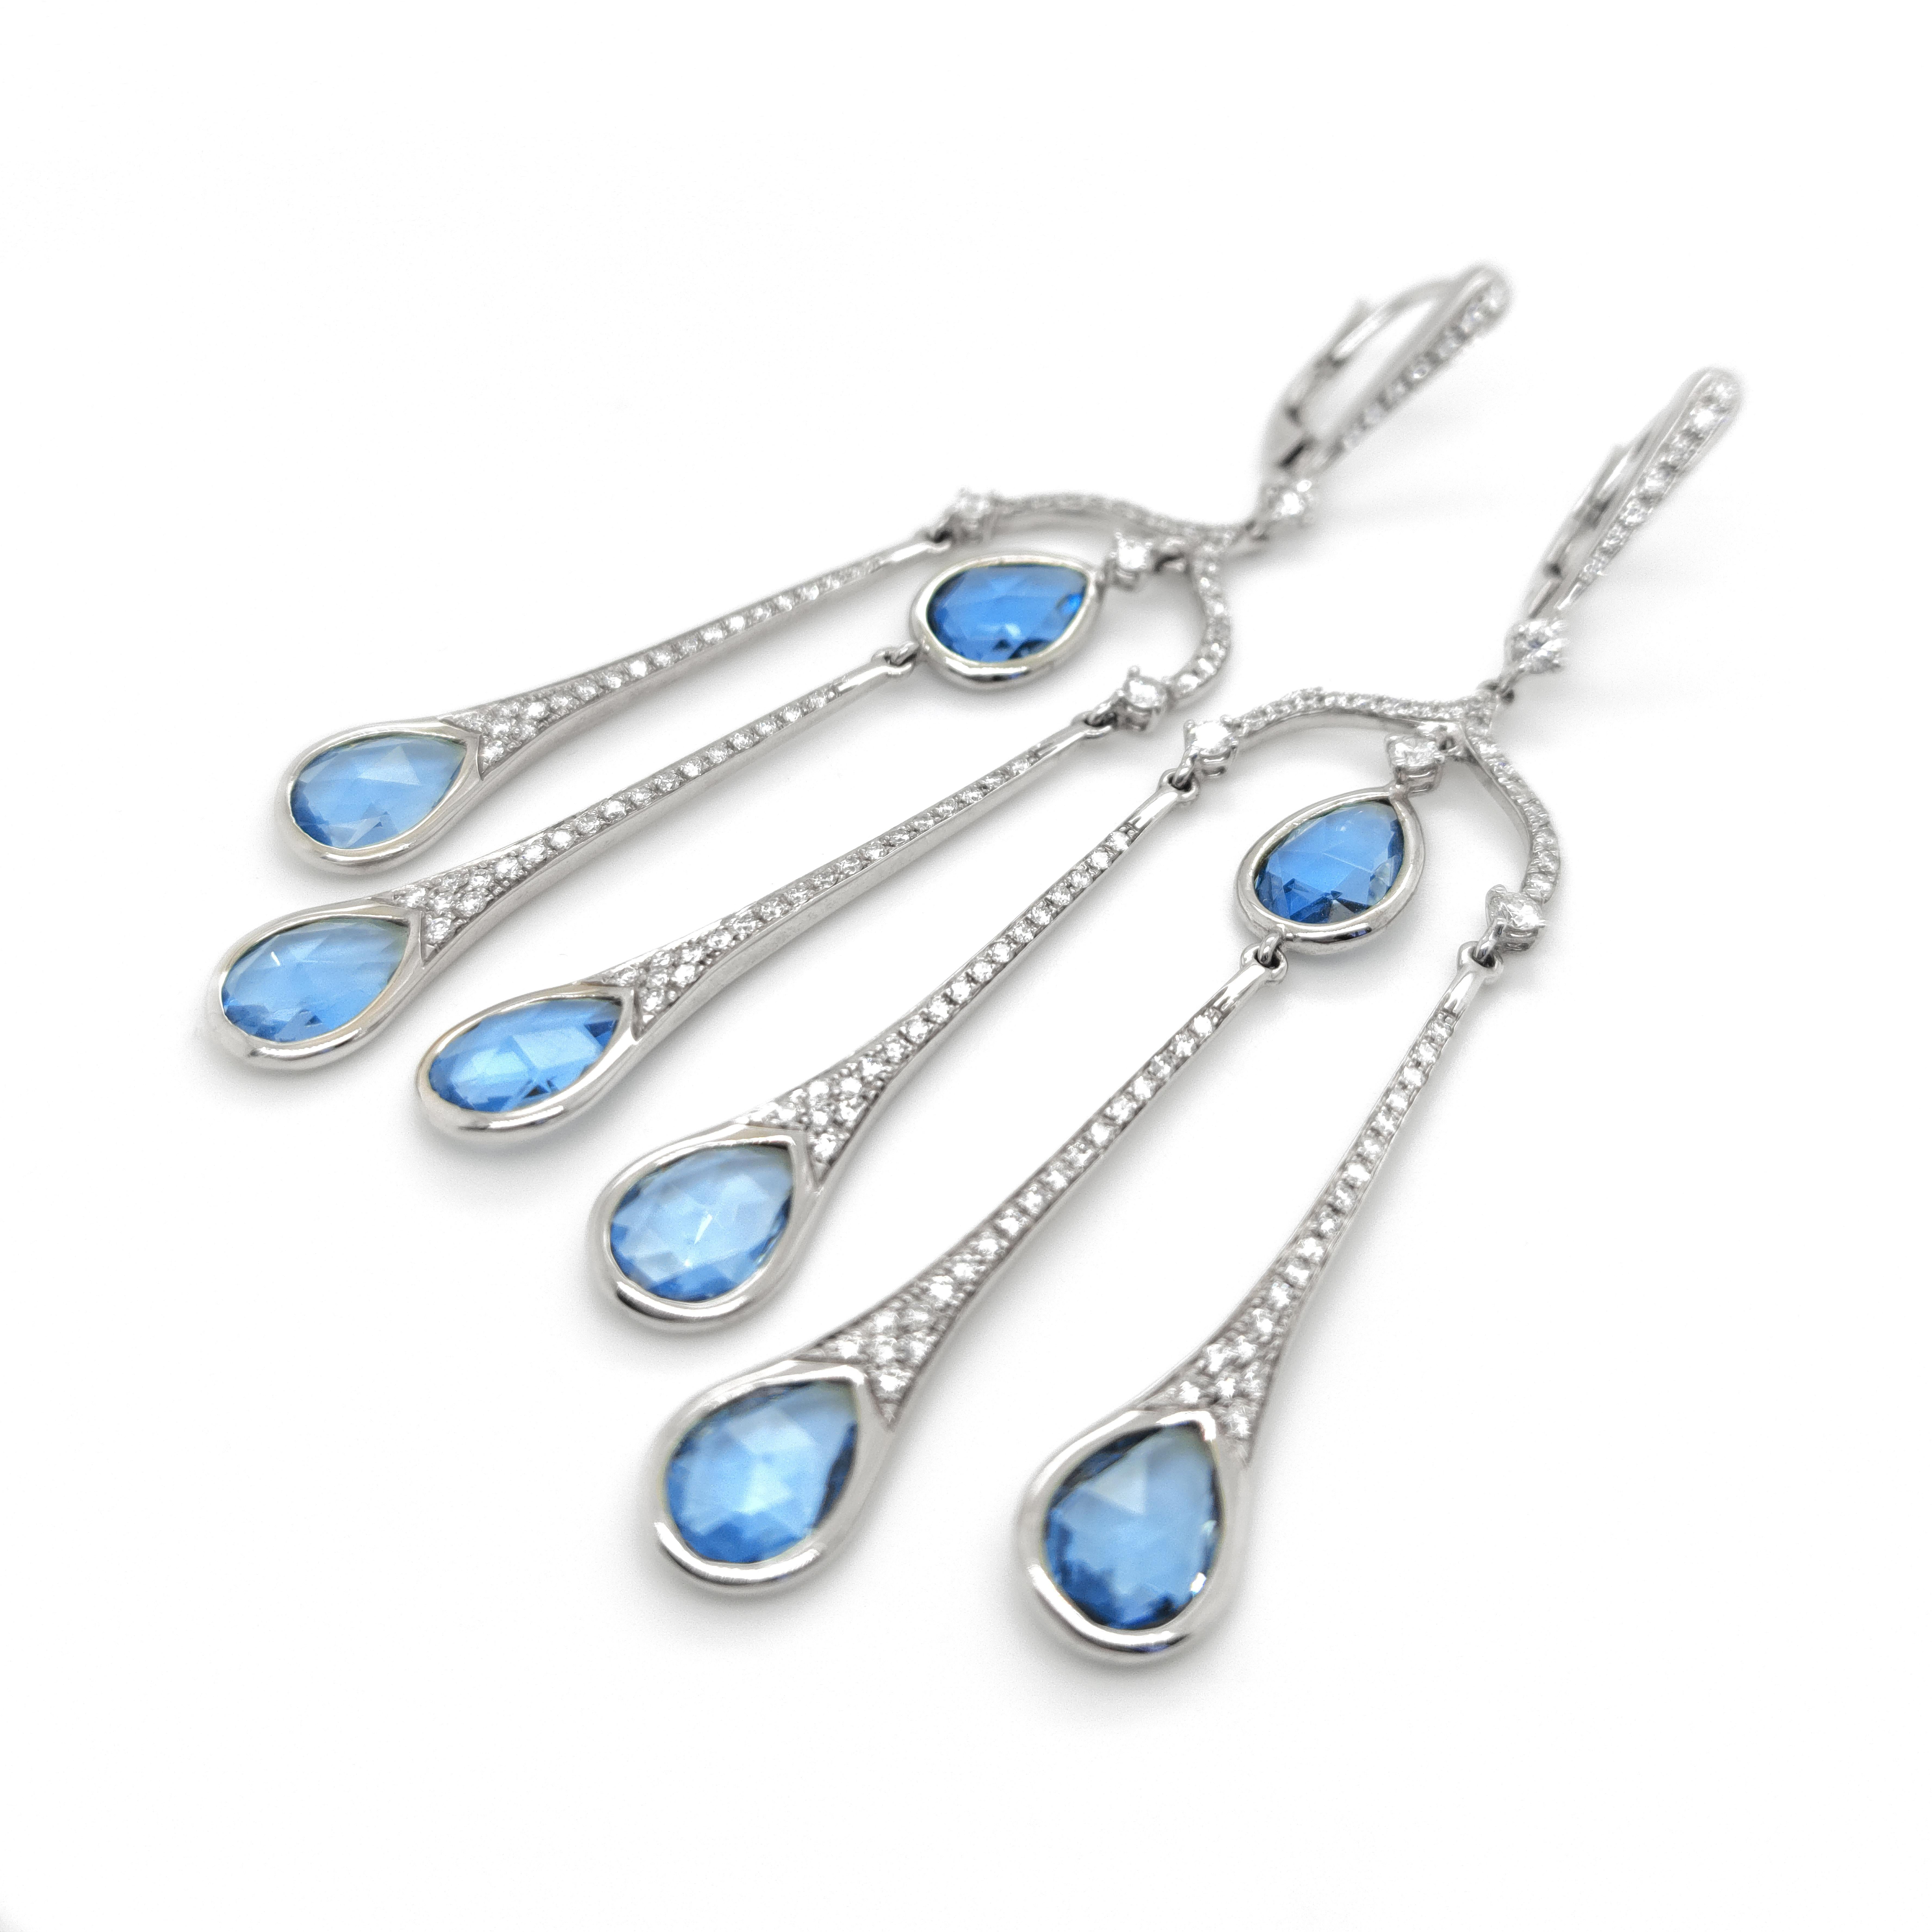 These drop chandelier earrings are a stunning combination of diamonds and blue topaz. The earrings feature a cascading design with multiple tiers, giving them an elegant and glamorous look. The diamonds are expertly set within the intricate